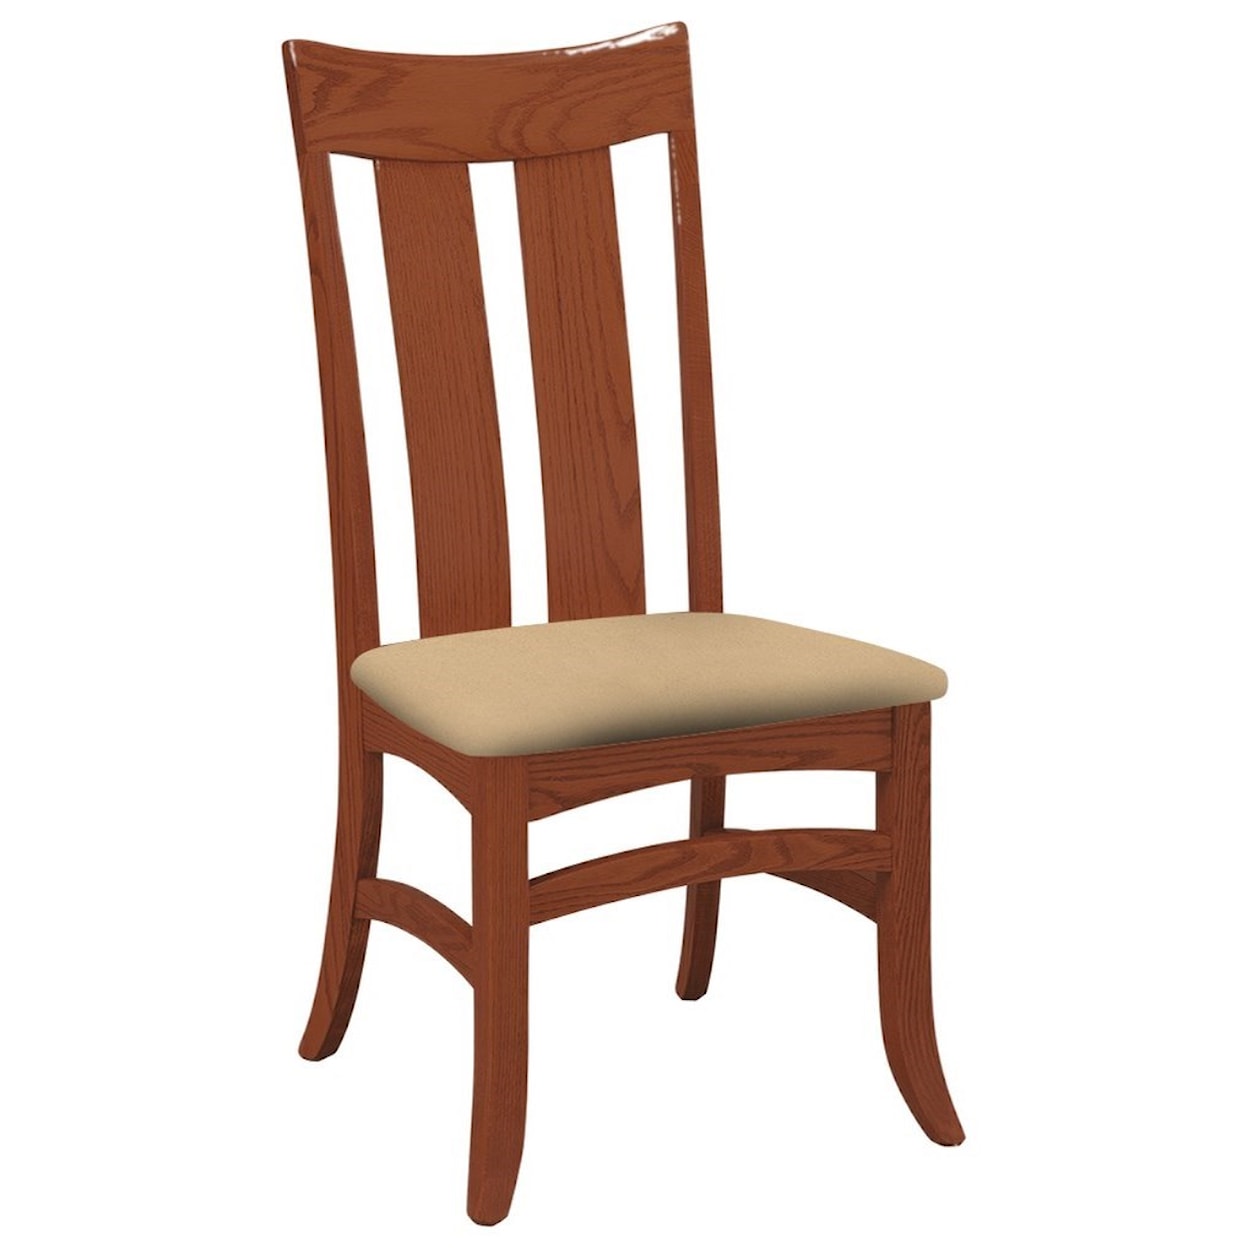 Daniels Amish Chairs and Barstools Galveston Side Chair